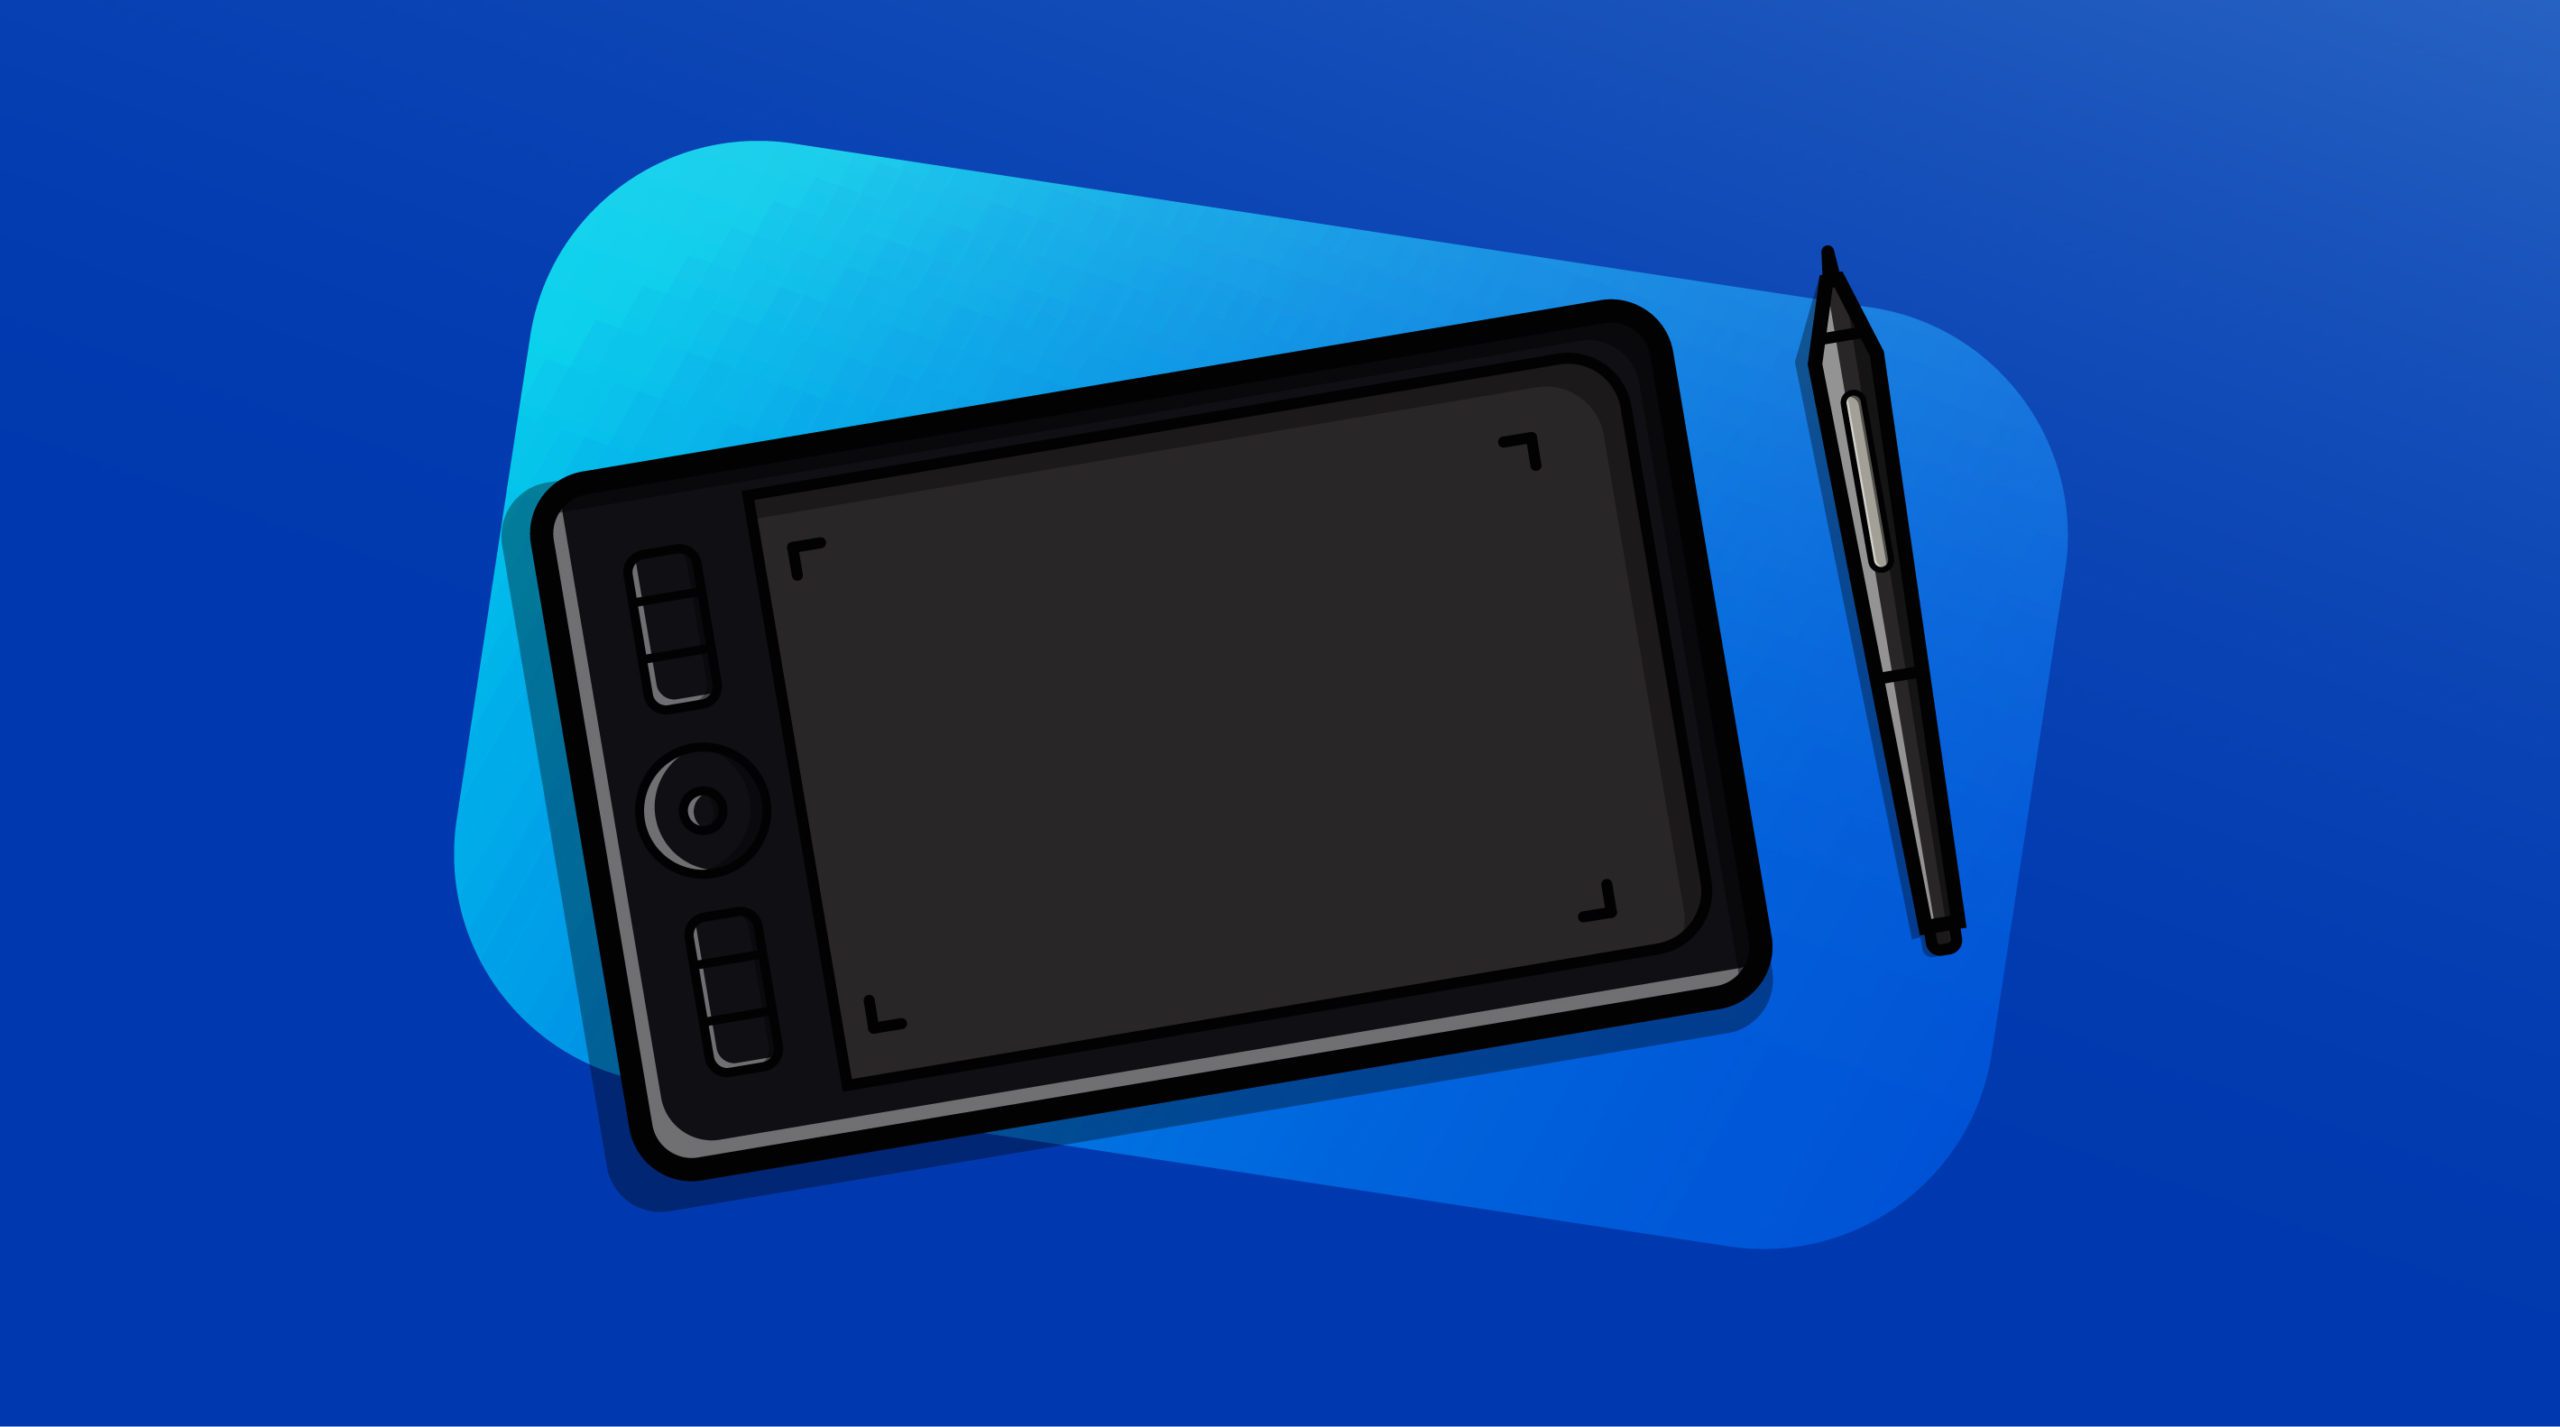 Pen tablets and displays for digital art drawing like on paper